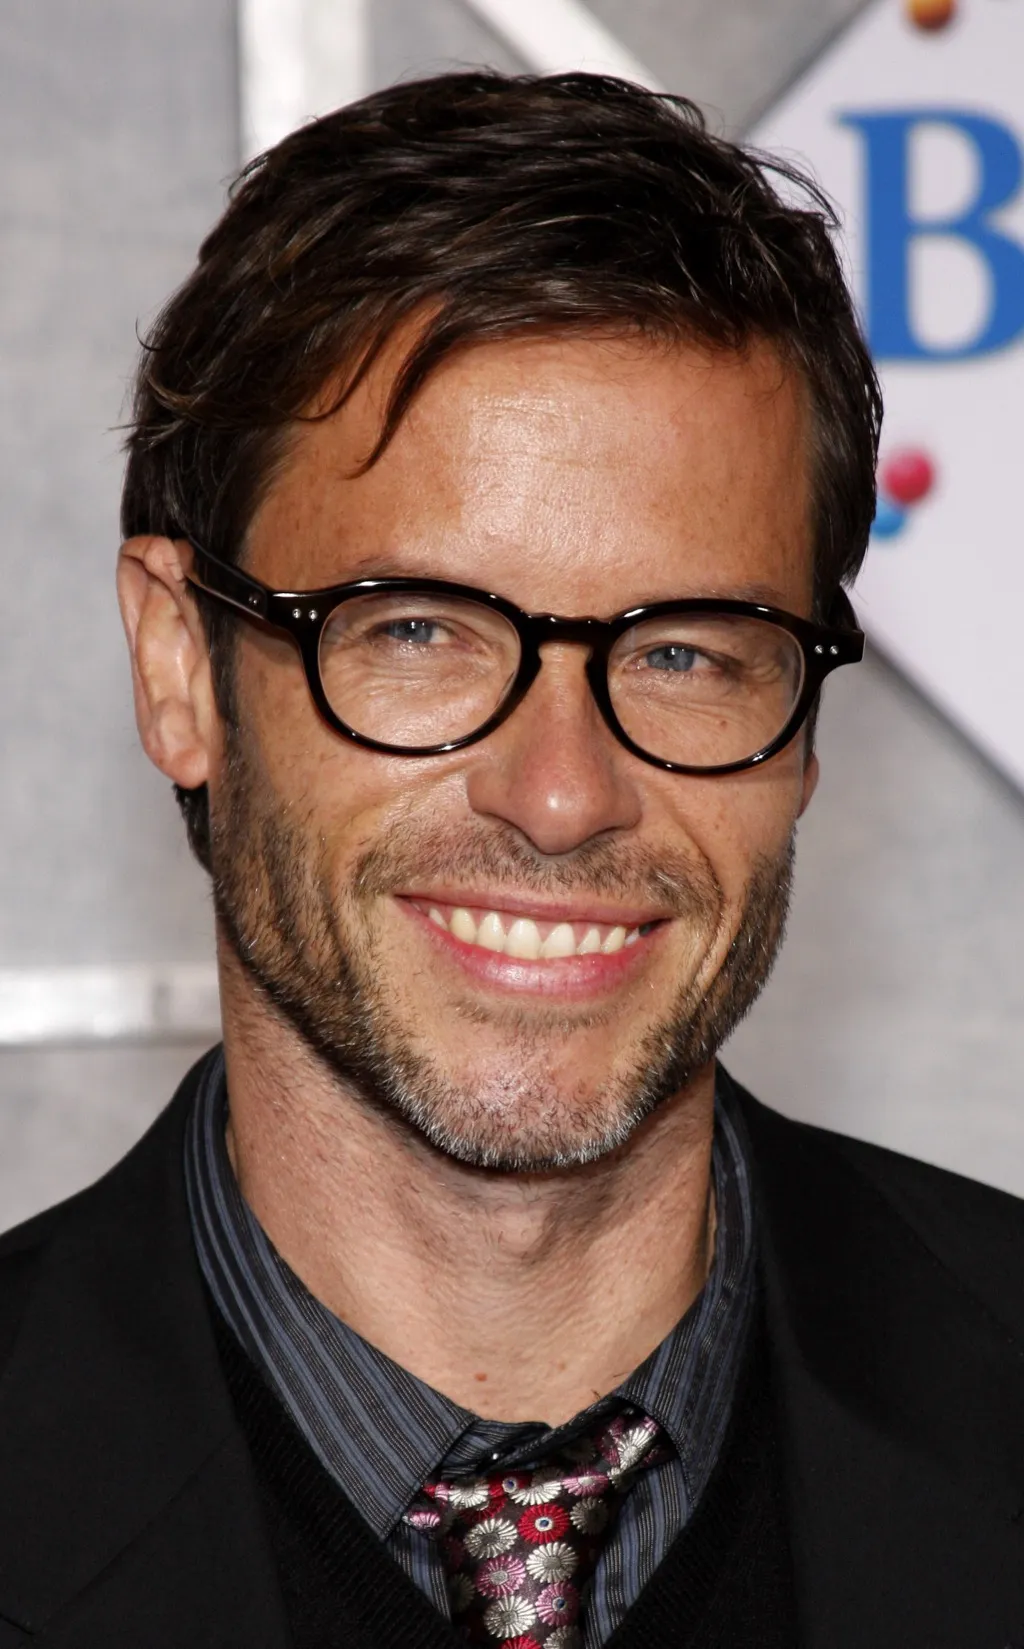 men's haircuts to look younger, starring Guy Pearce